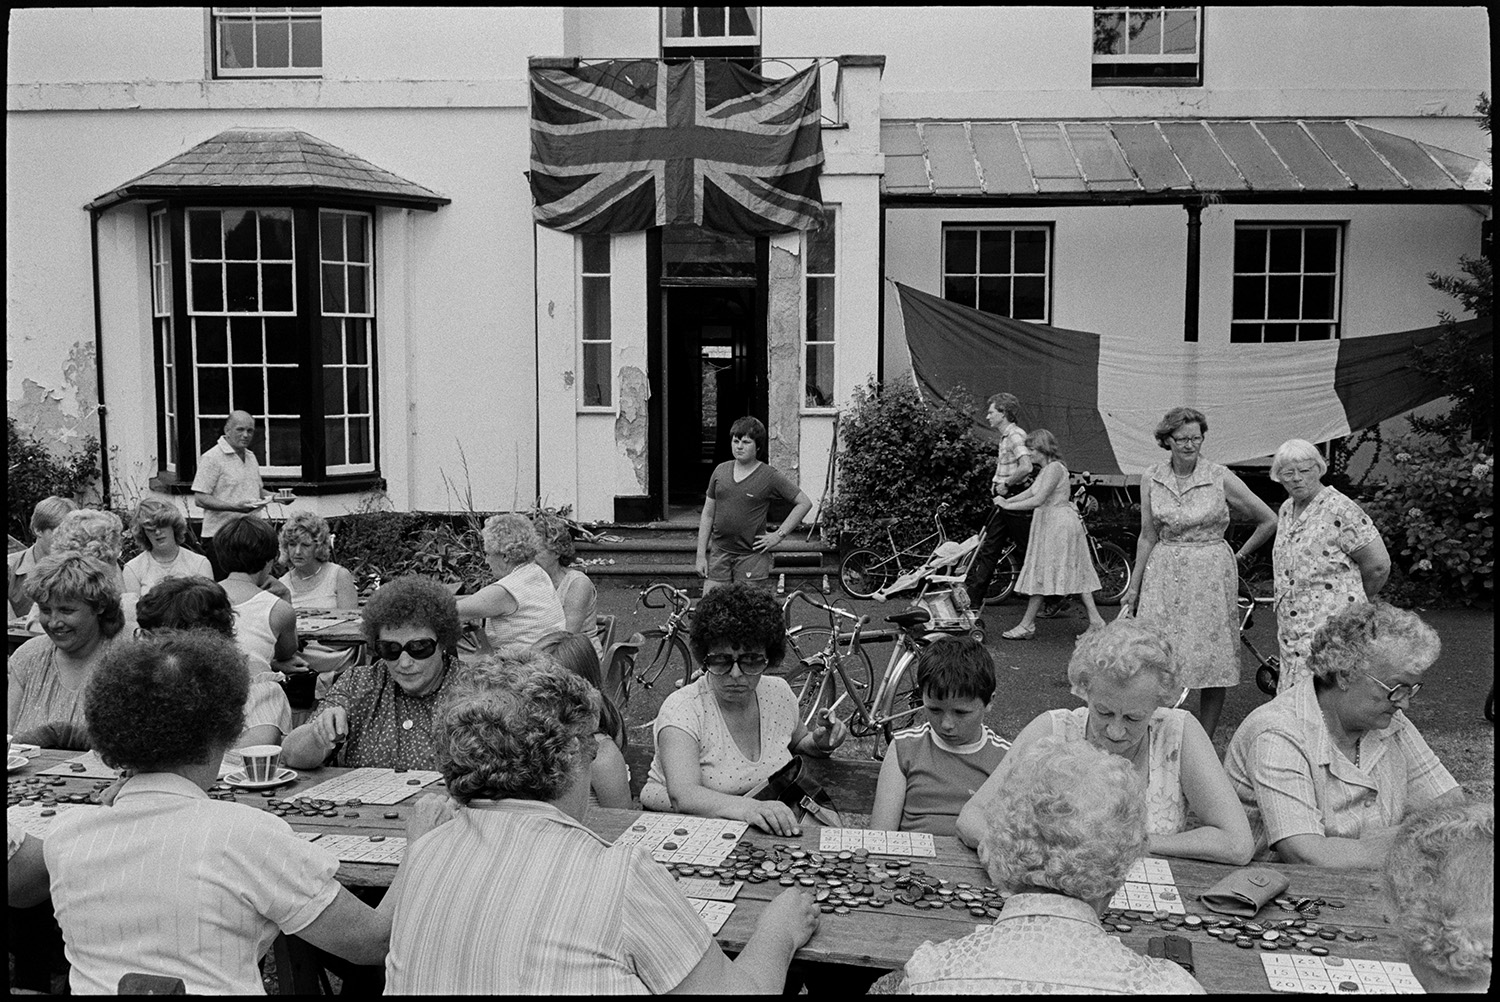 Vicarage fete, stalls, women playing bingo on lawn, teas and cakes. 
[Women and children playing bingo at a fete at Torrington Vicarage. Women and a child are watching in the background by bicycles. A couple pushing a pram and a man holding a cup of tea are also visible. The vicarage buildings is decorated with flags, including the Union Jack flag.]